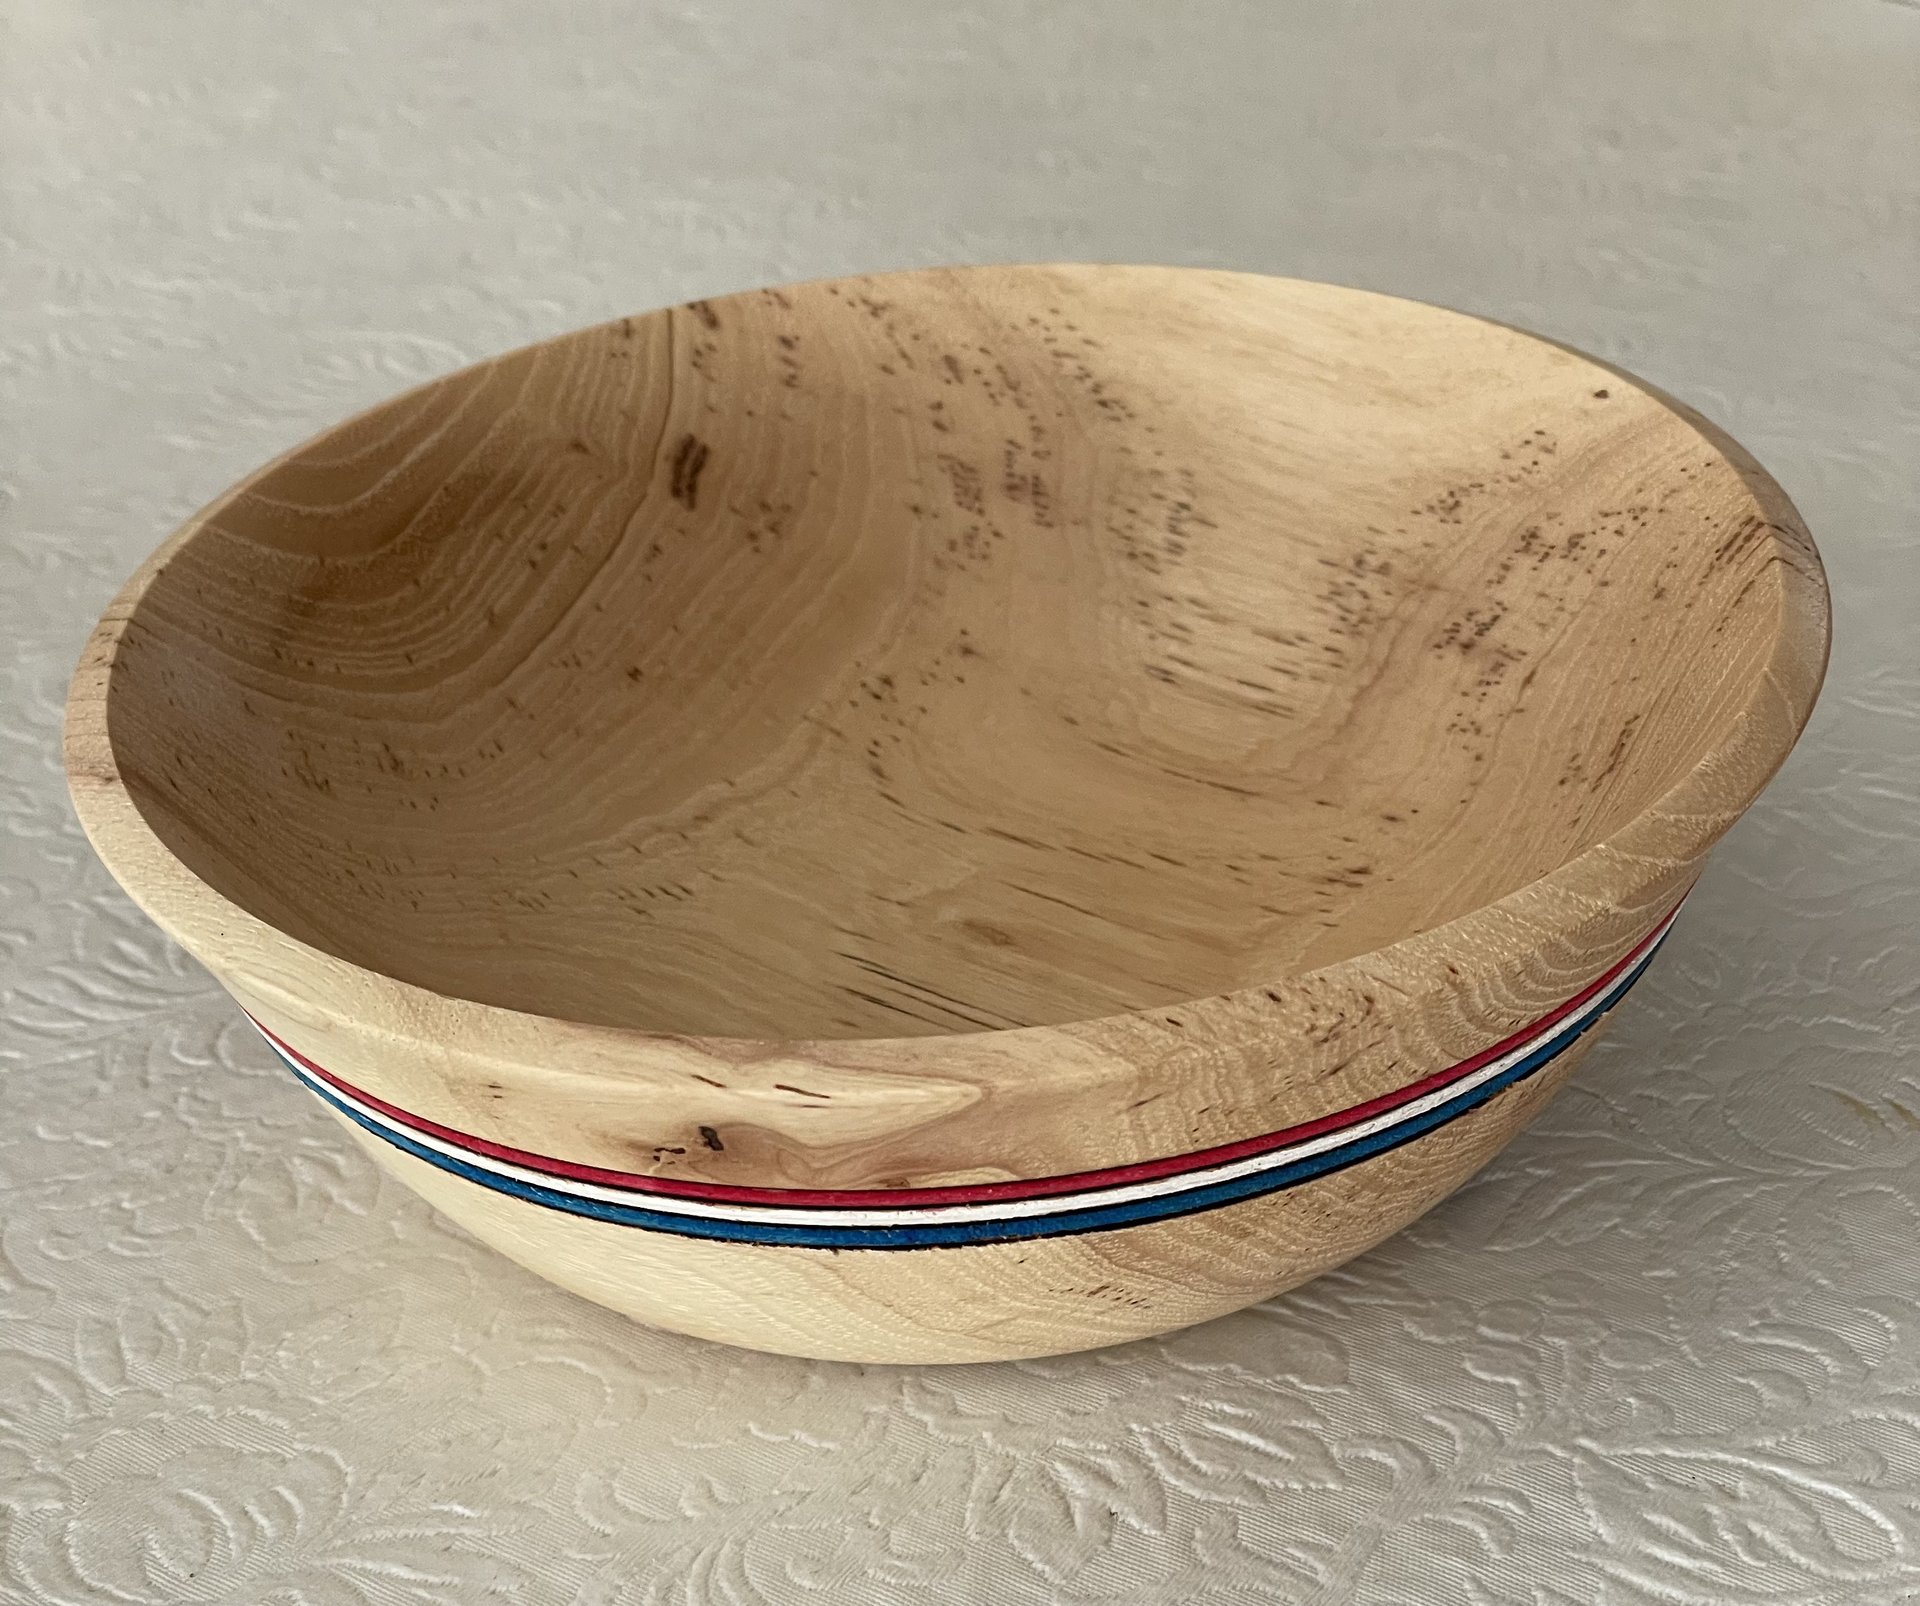 Pecan bowl embellished with patriotic color